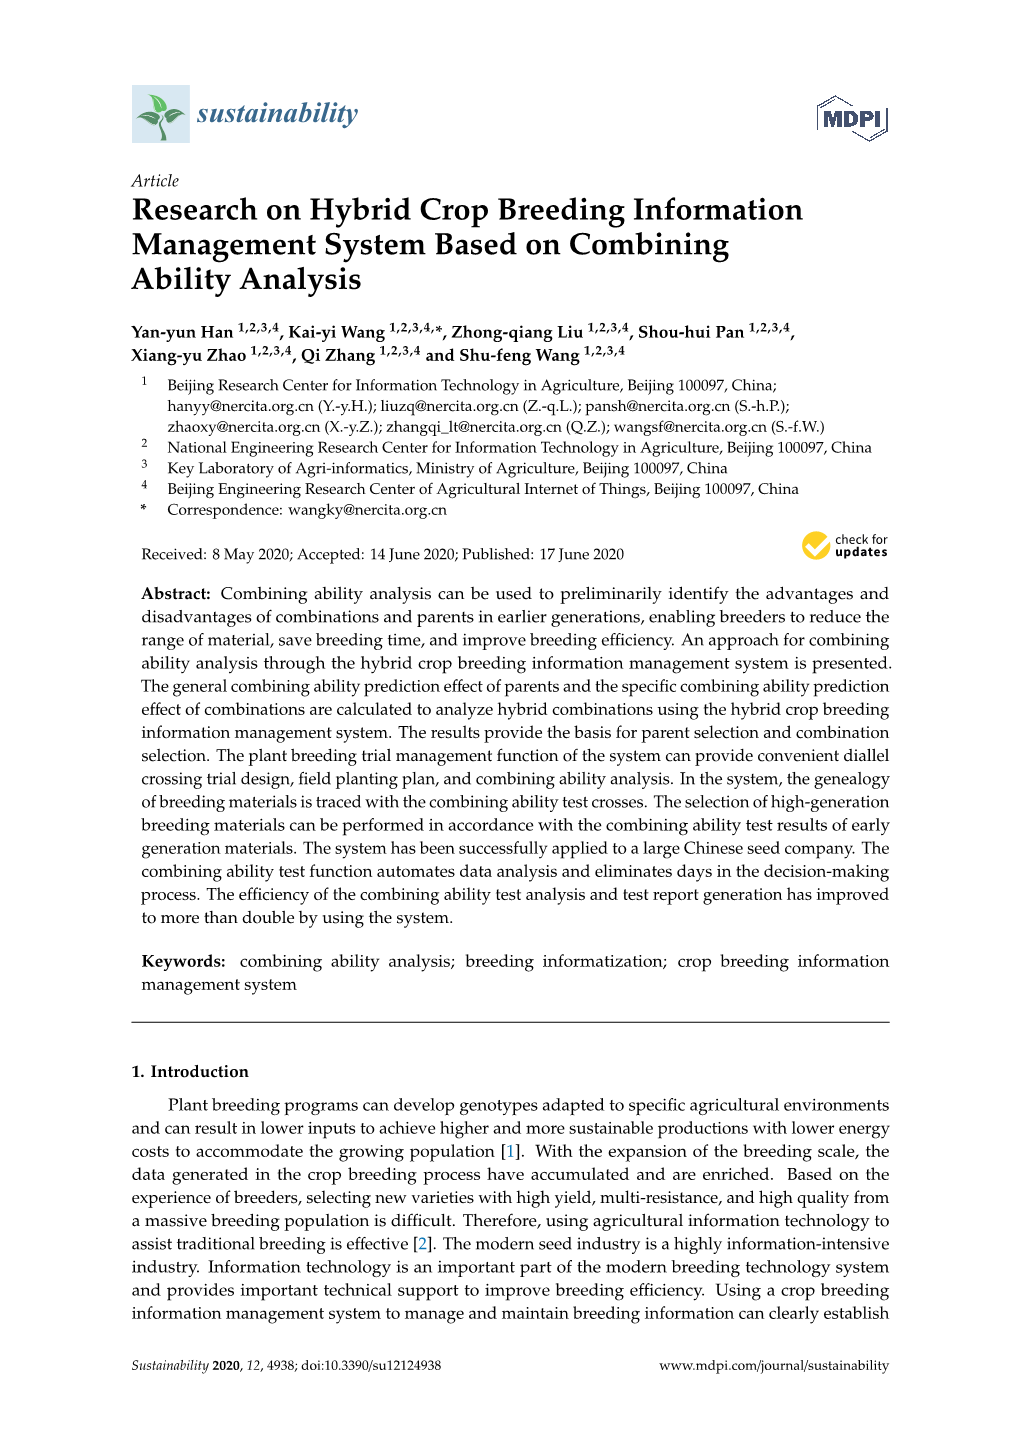 Research on Hybrid Crop Breeding Information Management System Based on Combining Ability Analysis